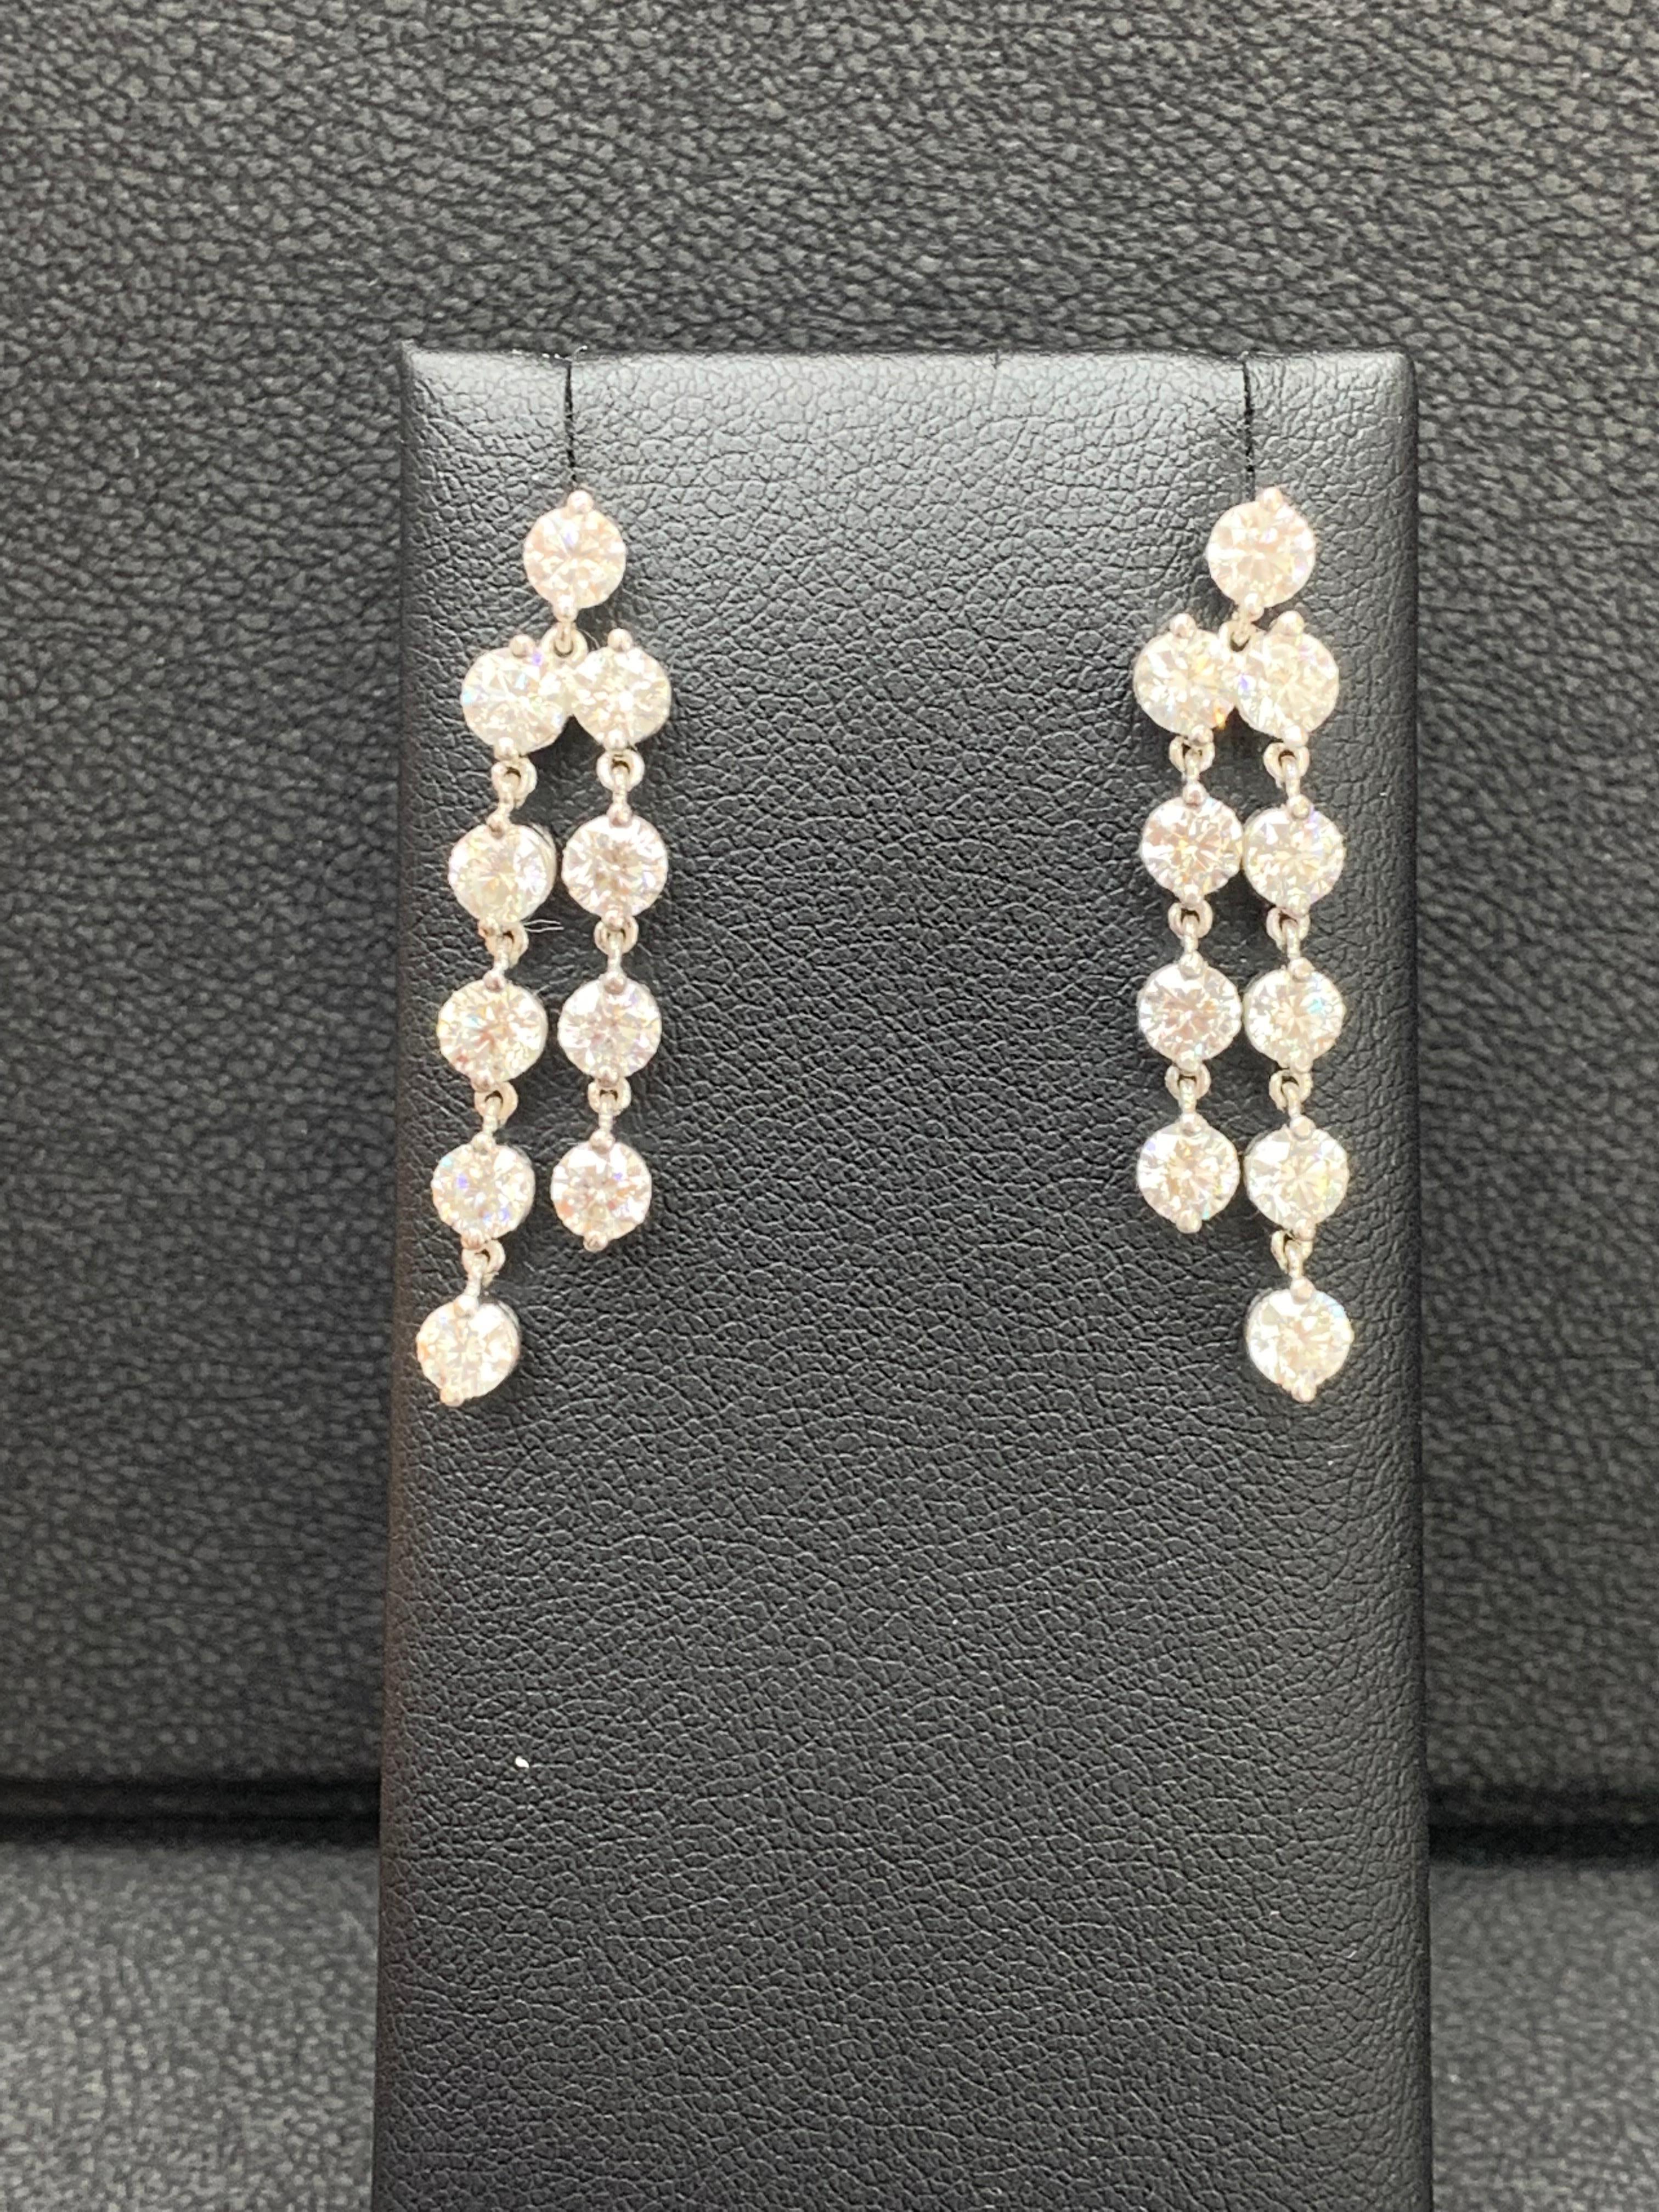 An important pair of dangle earrings showcasing two row of 5.01 carat round brilliant diamonds. 

Style available in different price ranges. Prices are based on your selection of the 4C’s (Carat, Color, Clarity, Cut). Please contact us for more